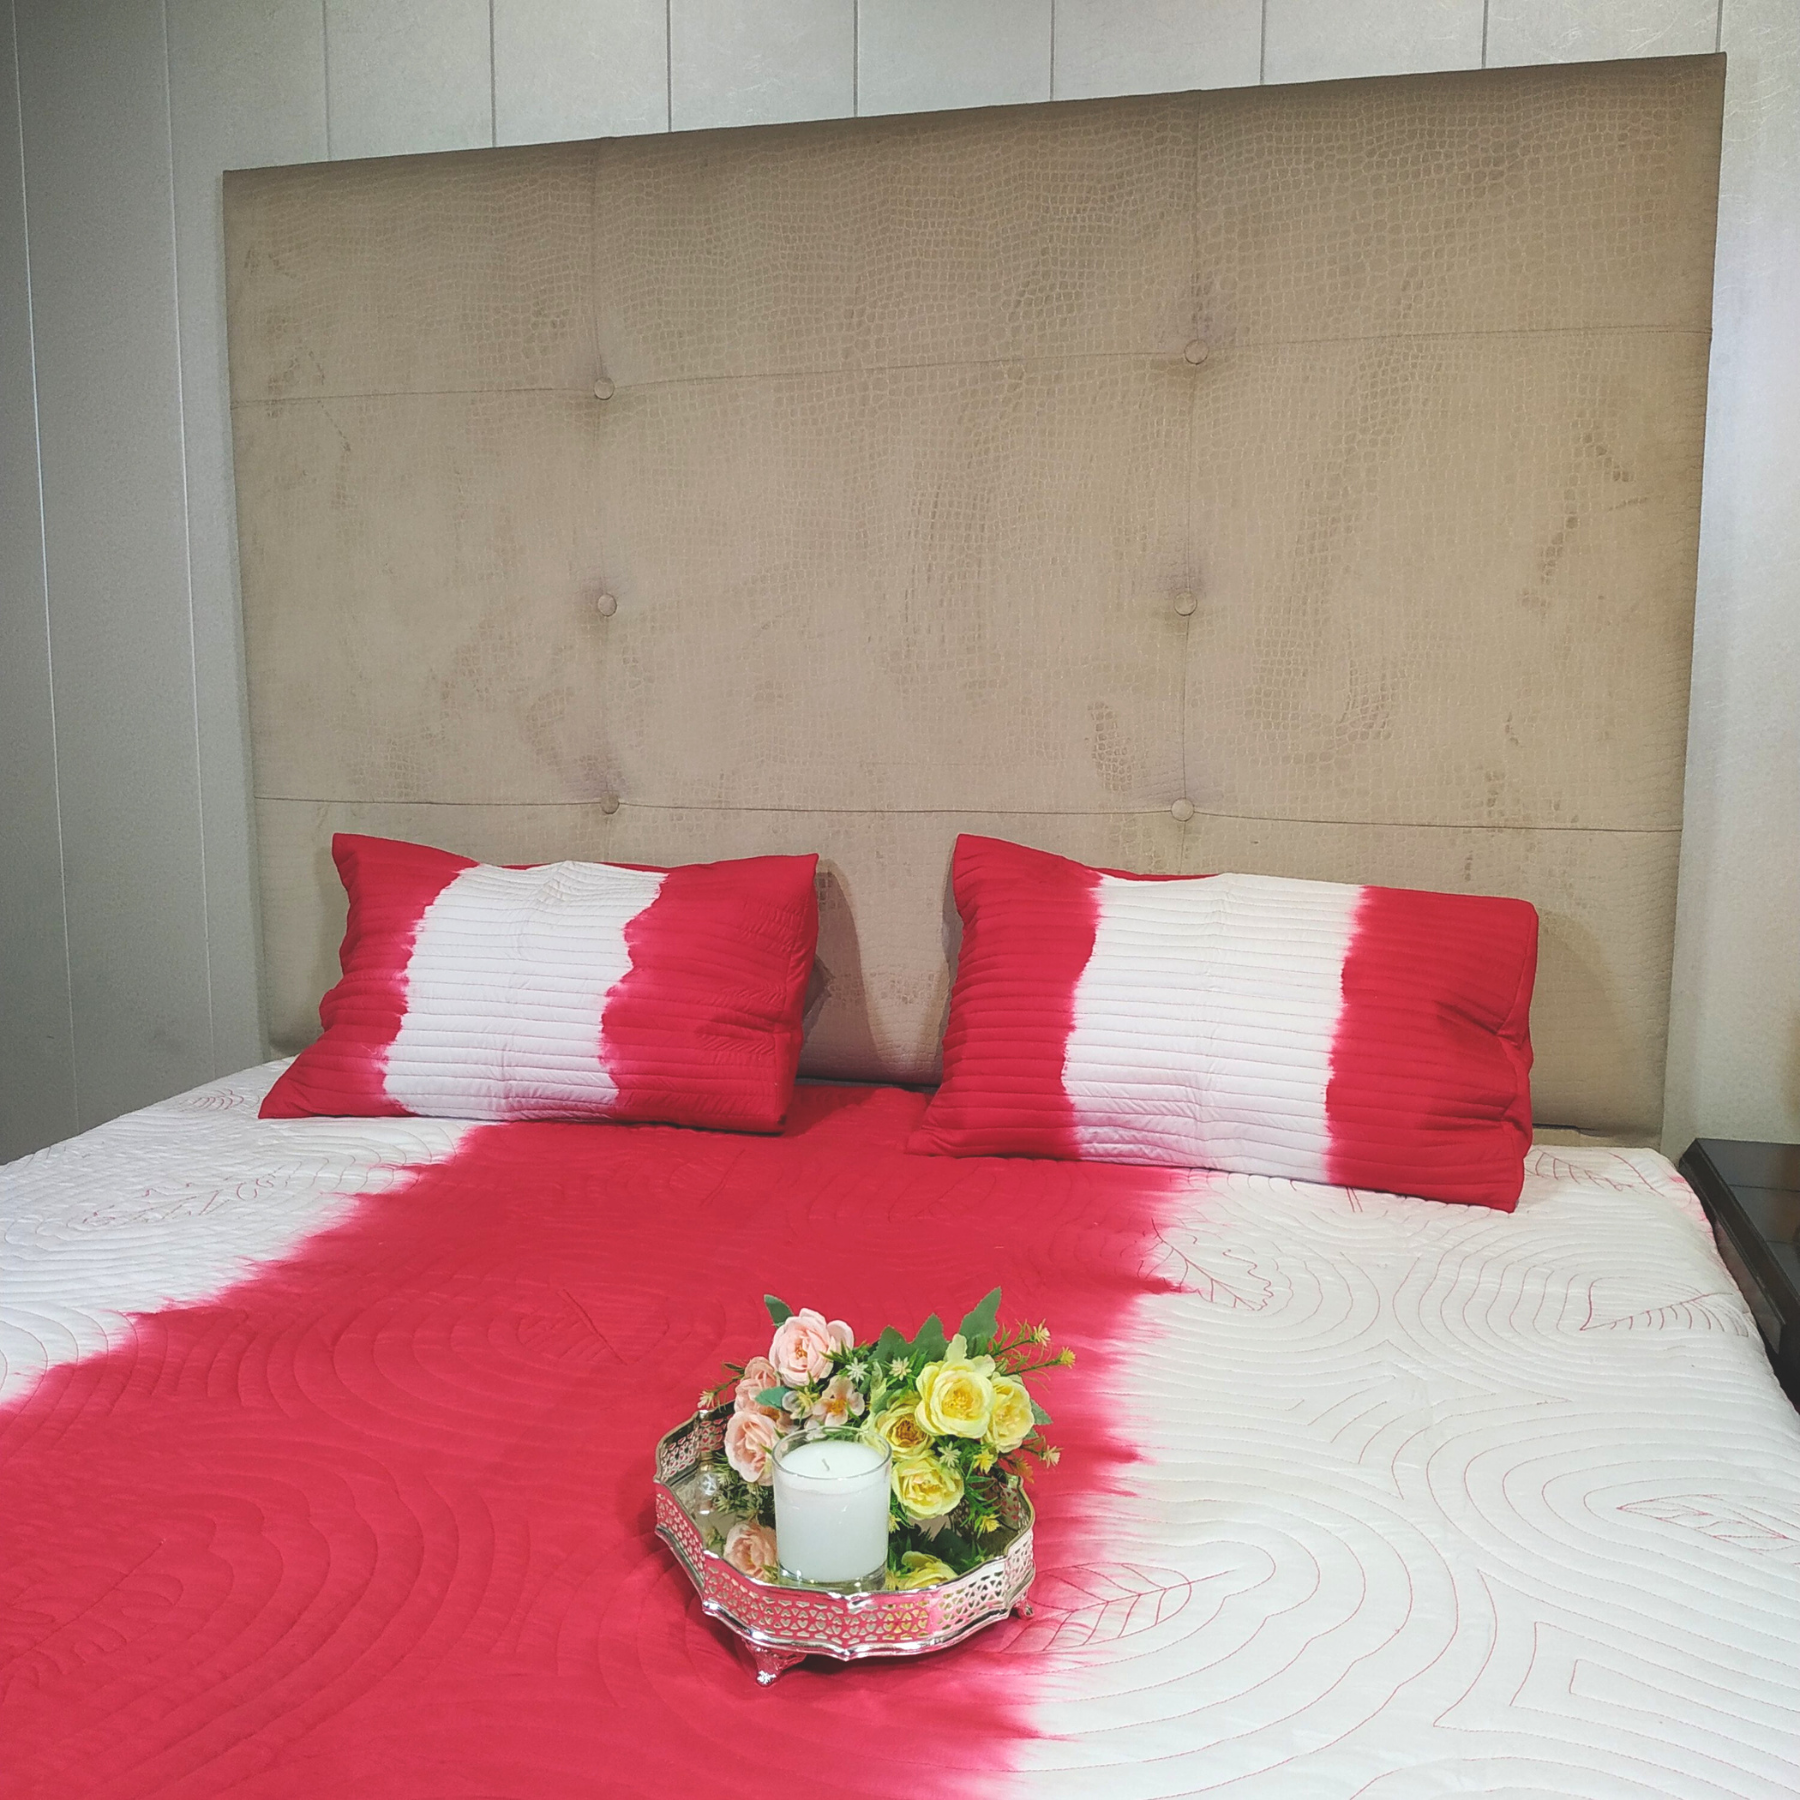 The LuxeLife Red Shaded Qulited Bedcover